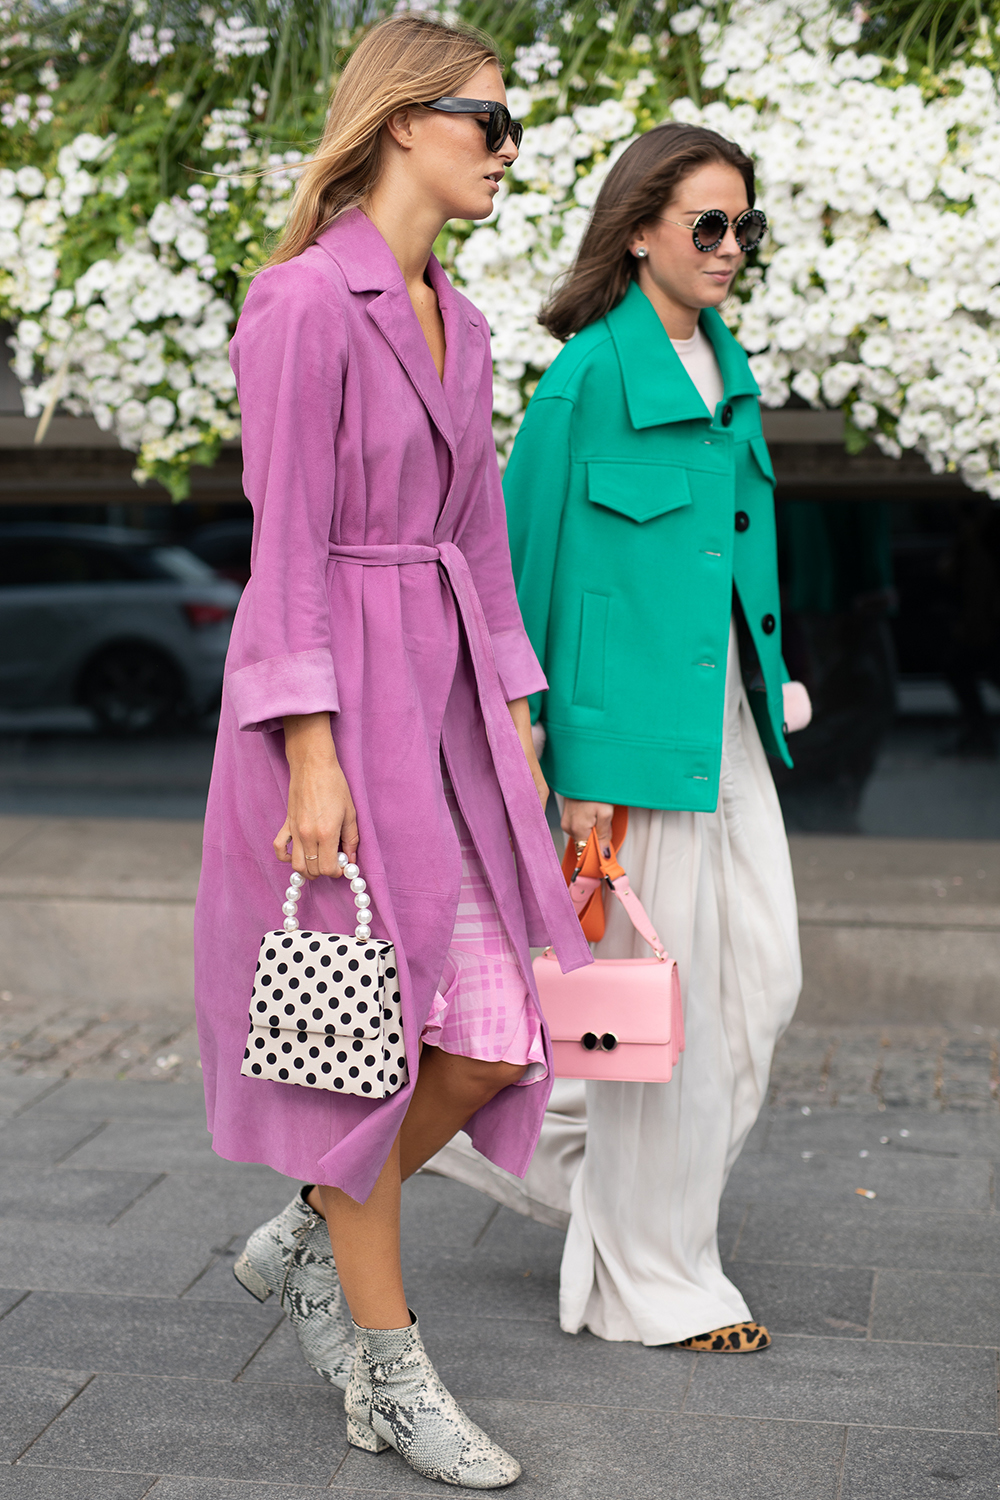 STOCKHOLM, SWEDEN - AUGUST 30: Guests are seen on the street during Fashion Week Stockholm SS19 on August 30, 2018 in Stockholm, Sweden. (Photo by Matthew Sperzel/Getty Images)